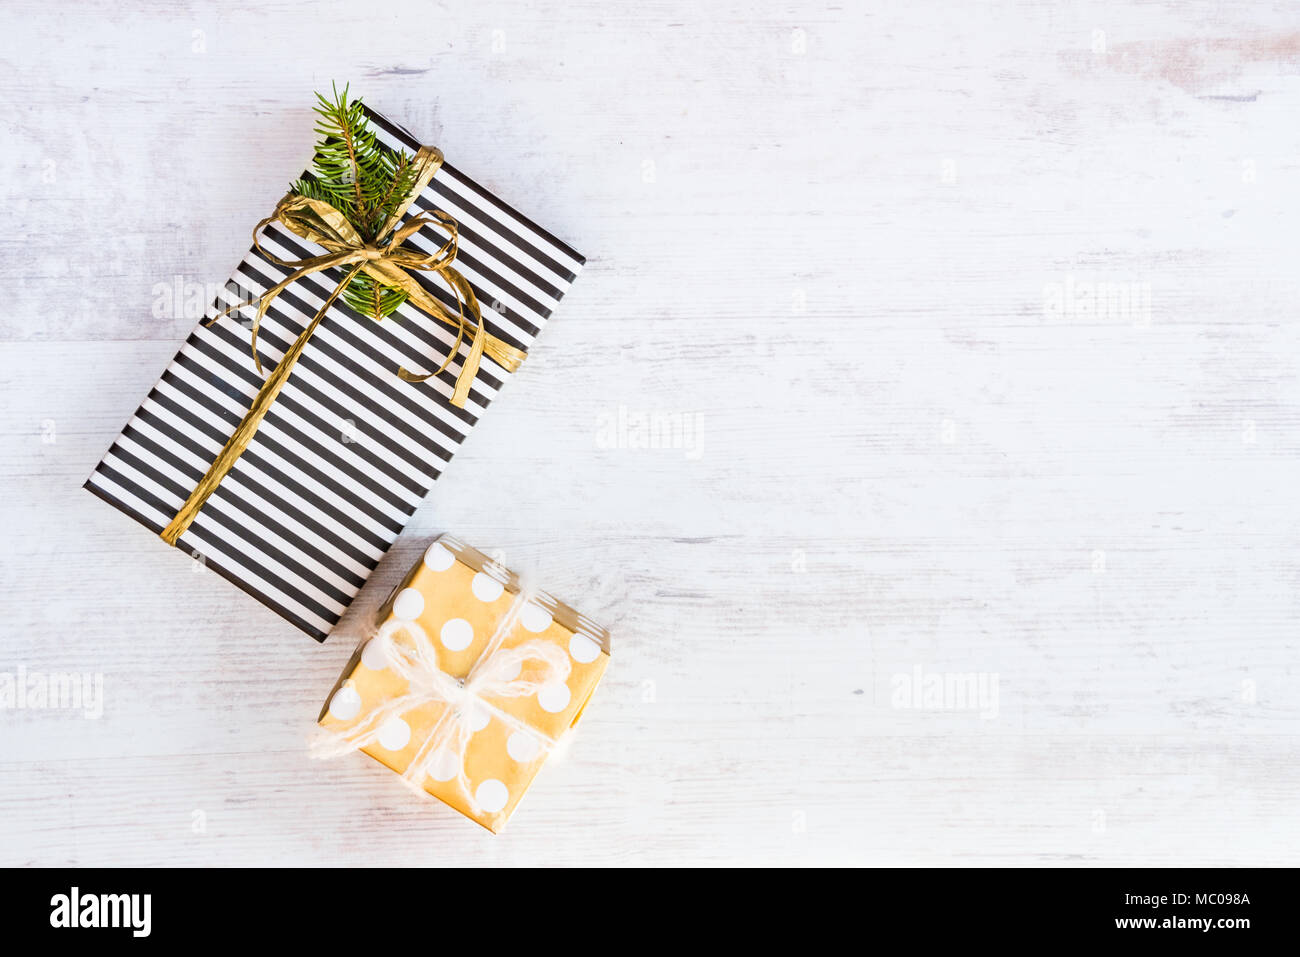 Gift boxes wrapped in black and white striped and golden dotted paper on a white wood background. Christmas presents. Empty space. Stock Photo